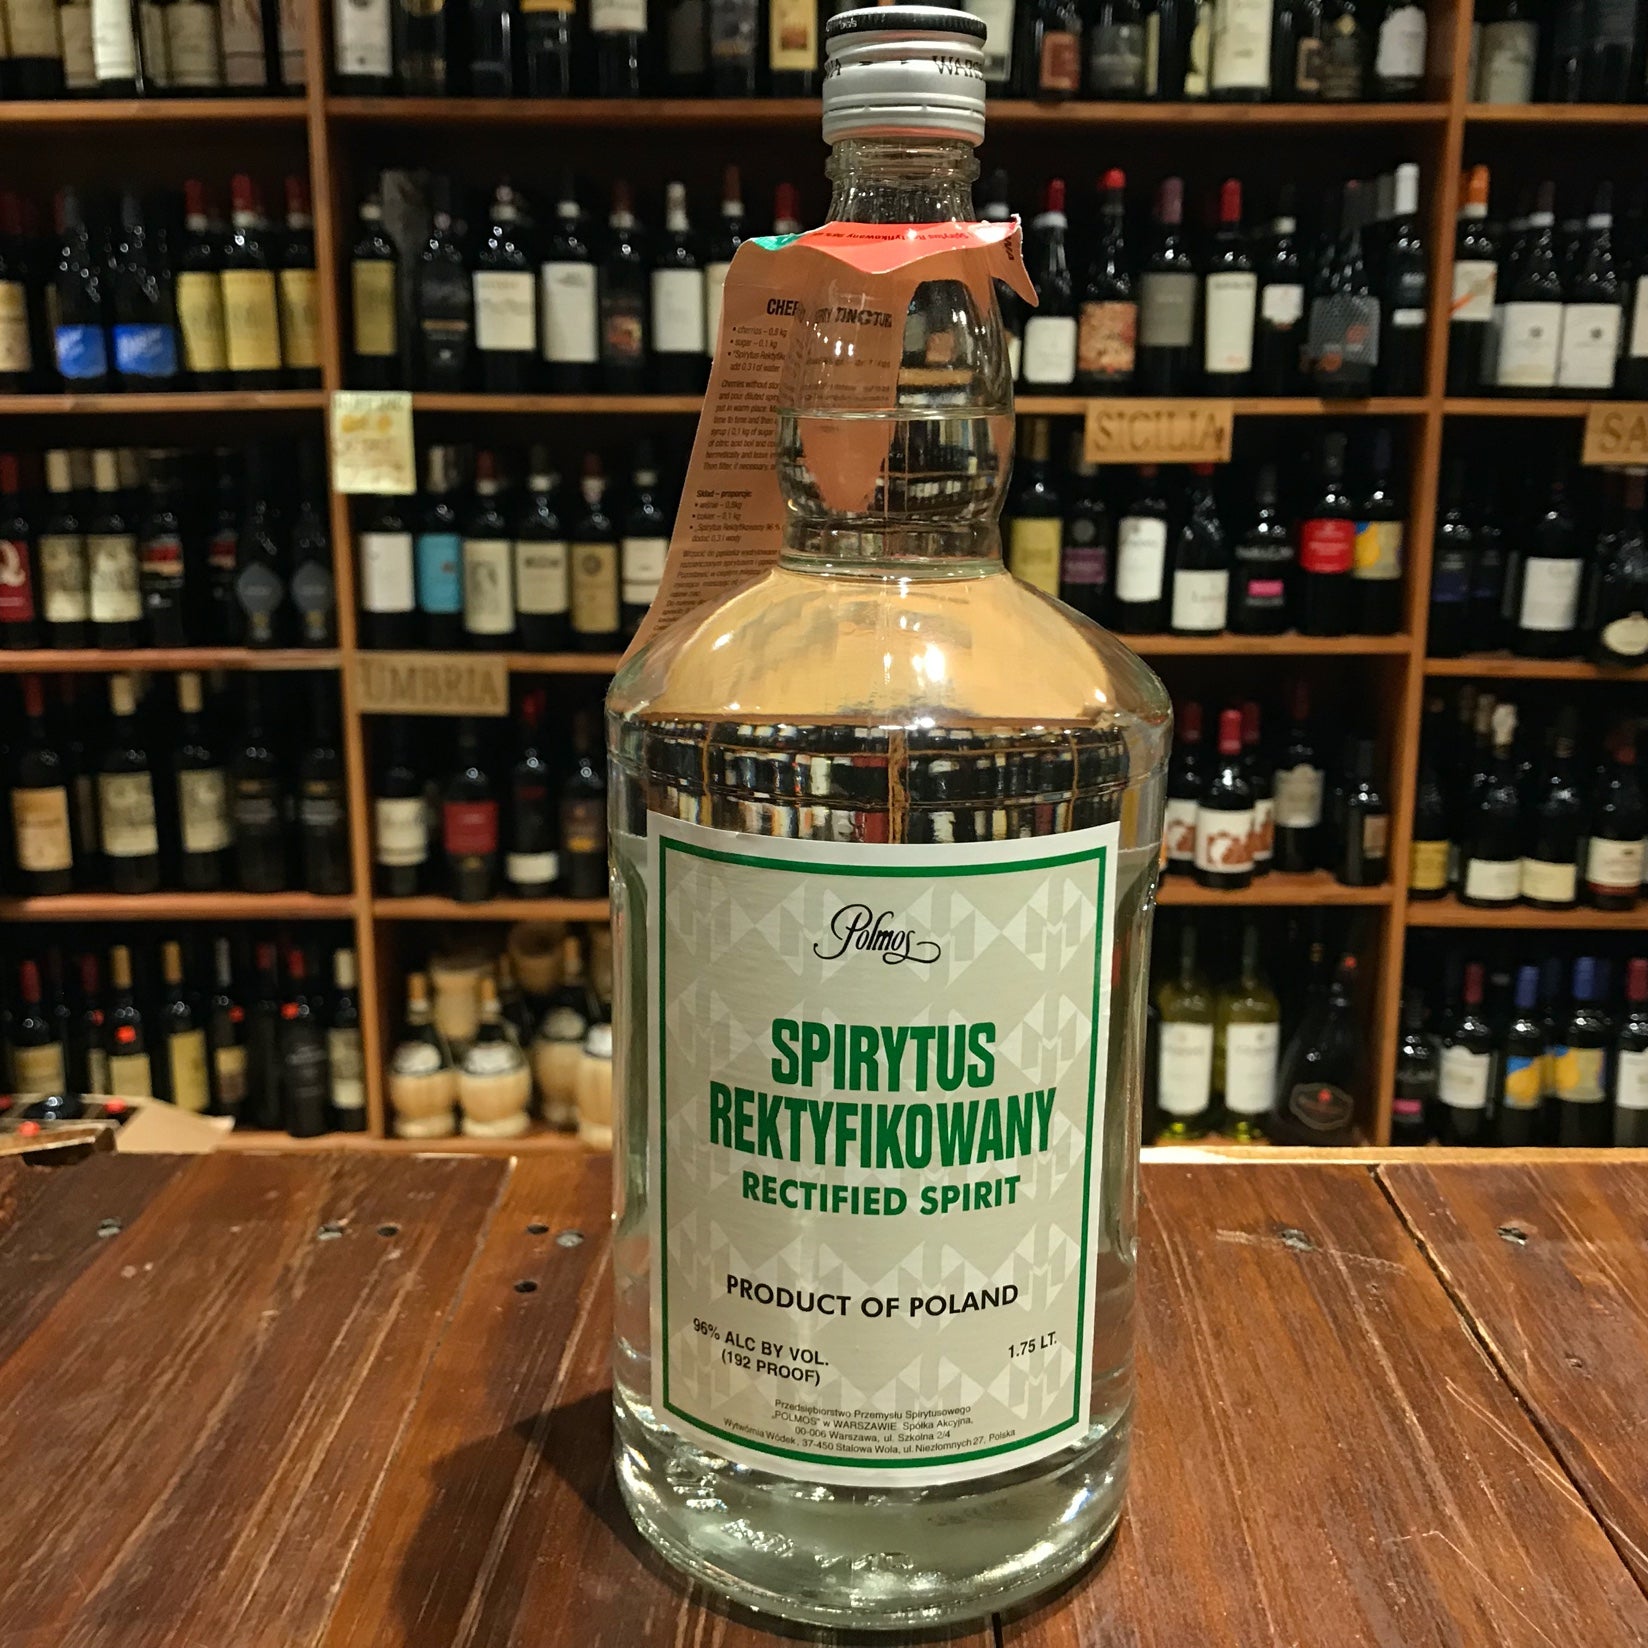 Polmos Spirytus Rektyfikowany 192º 1.75L a large clear glass bottle with a green and white label and silver top